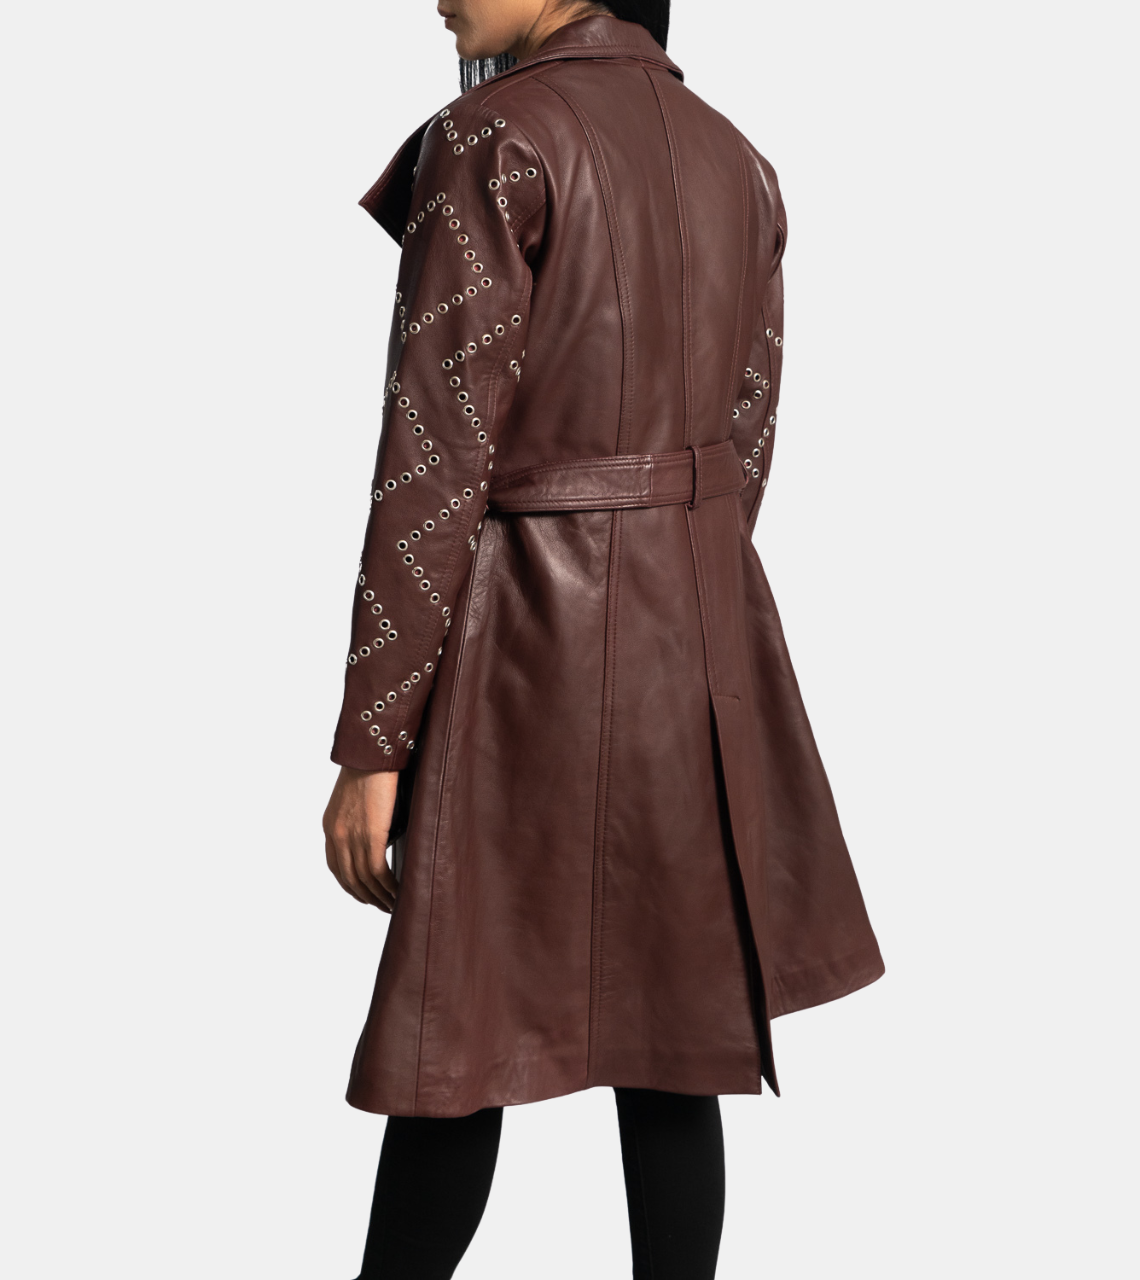  Dulcie Women's Brown Leather Trench Coat  Back